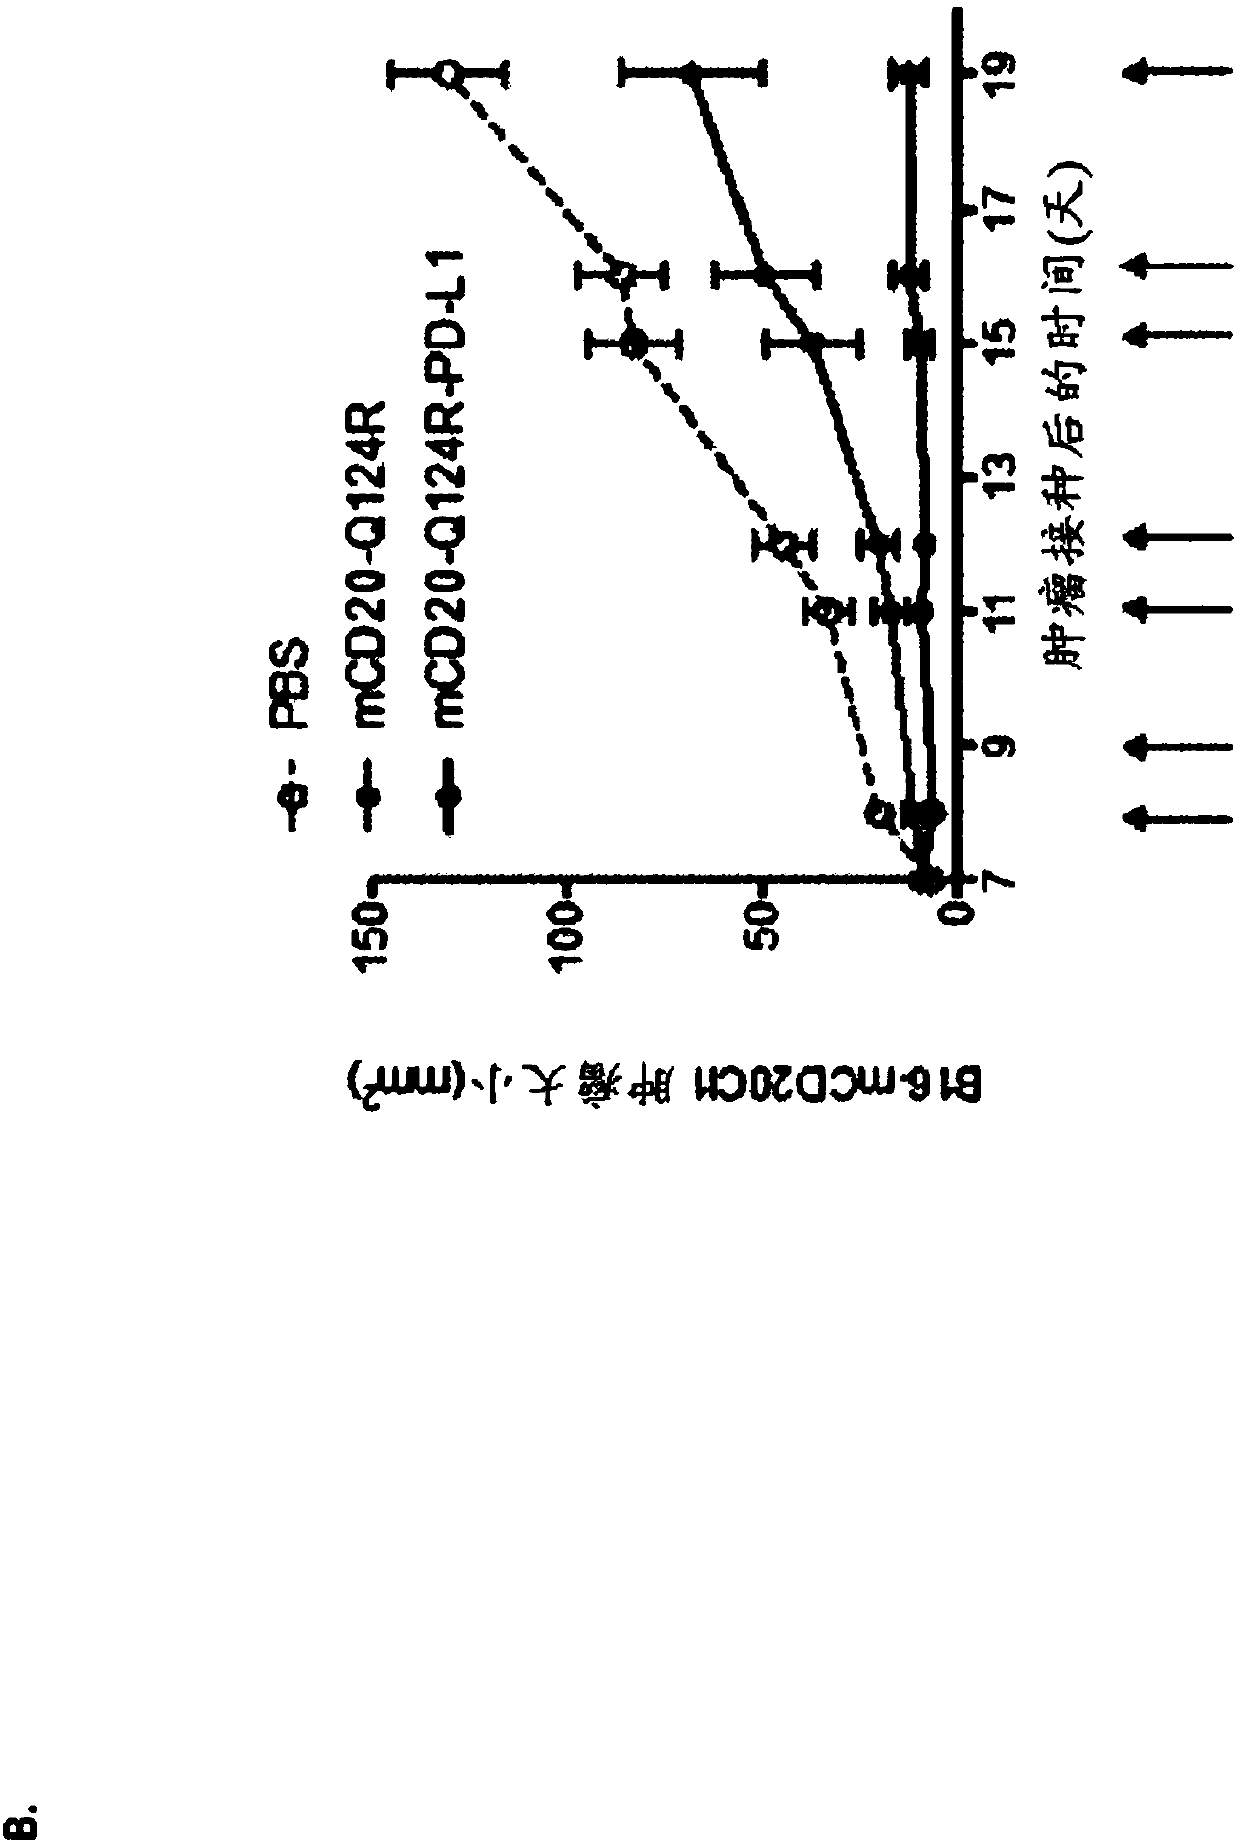 Bispecific signaling agents and uses thereof